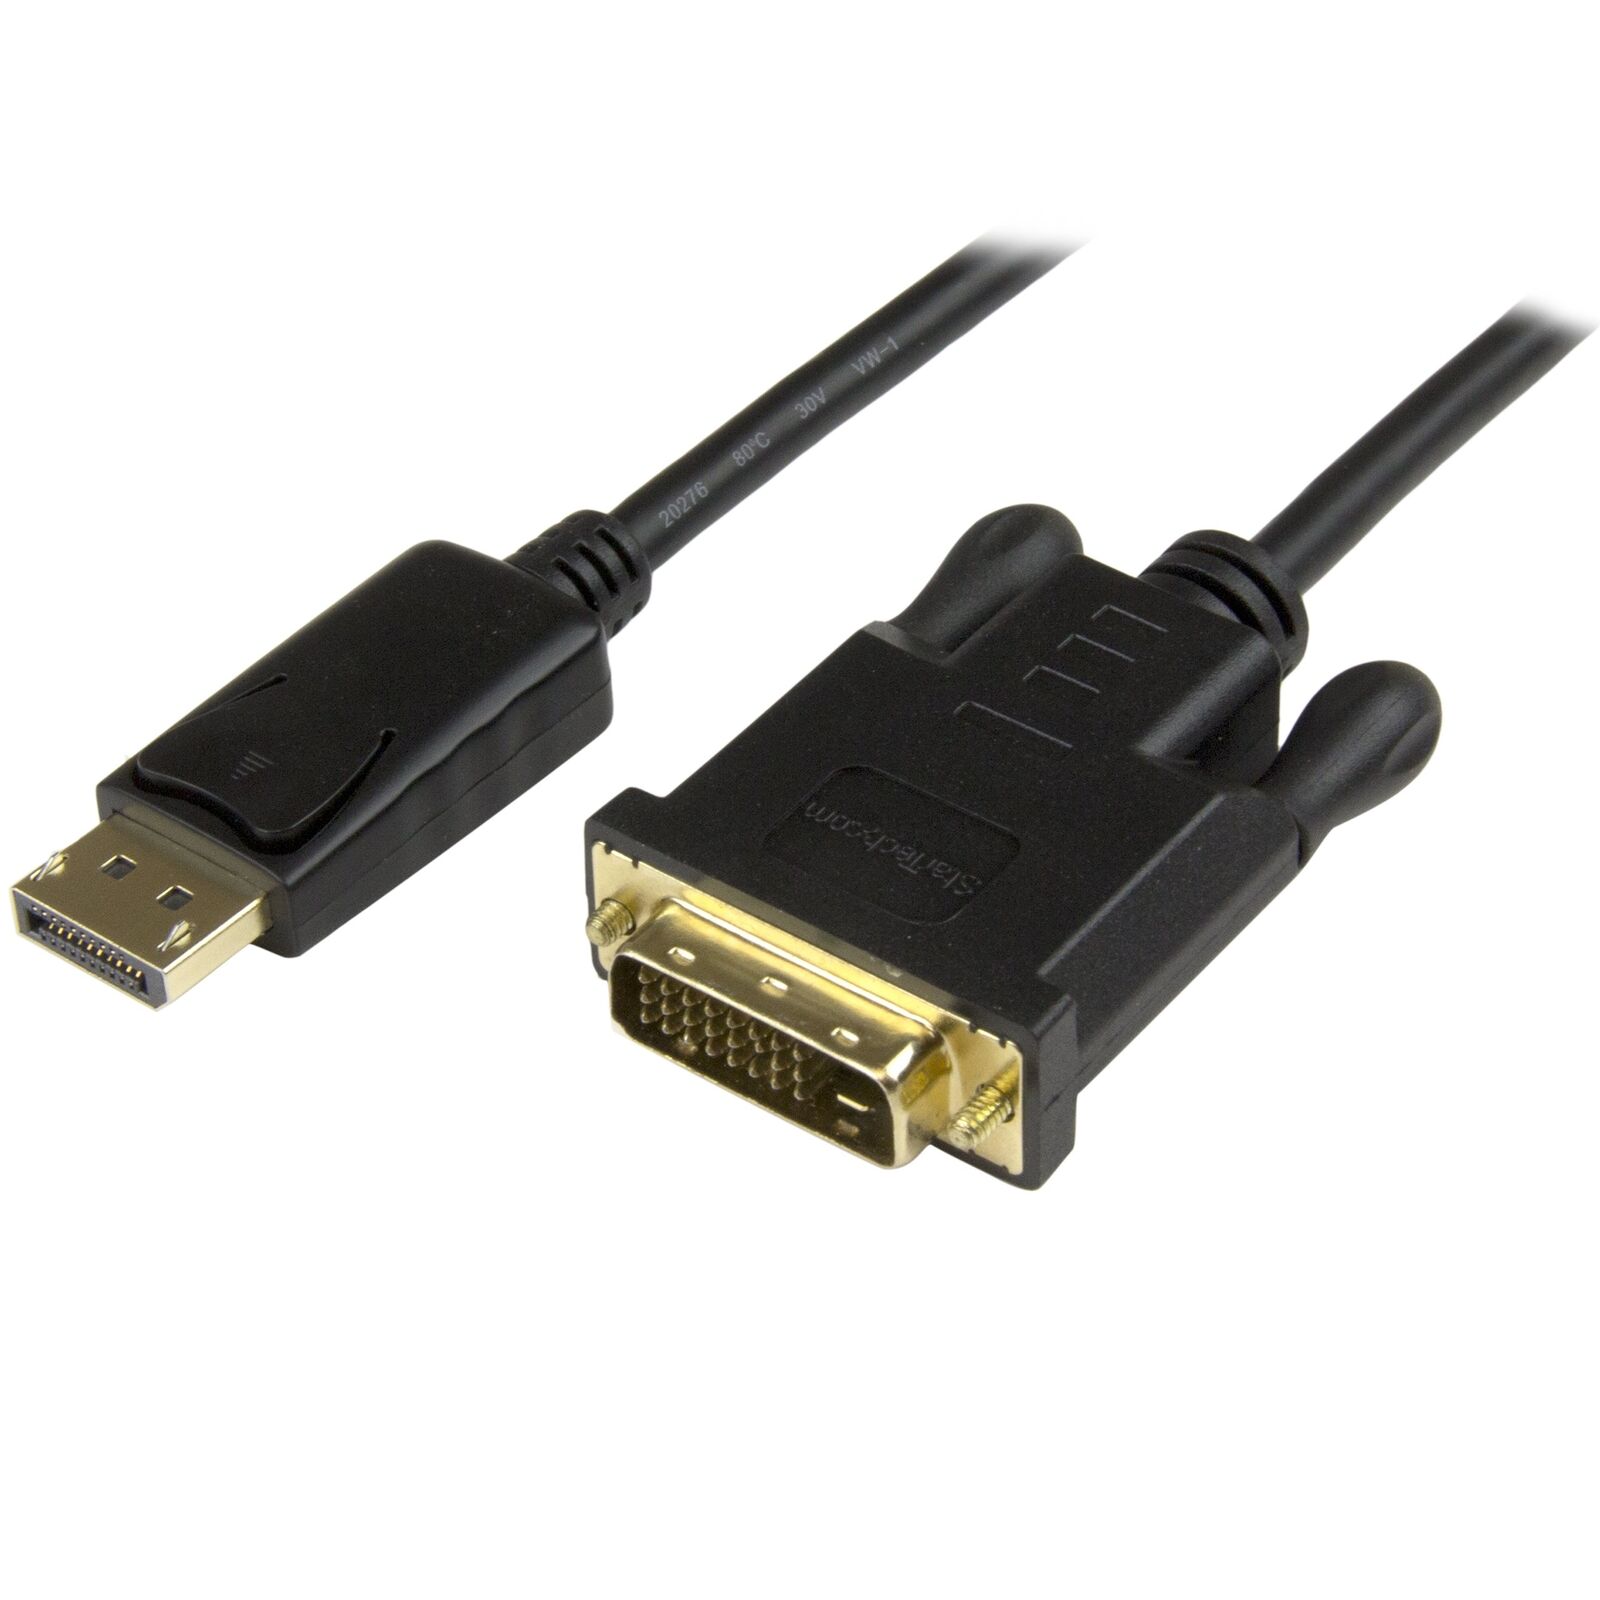 StarTech.com DisplayPort to DVI Converter Cable - DP to DVI Adapter - 3ft - 1920